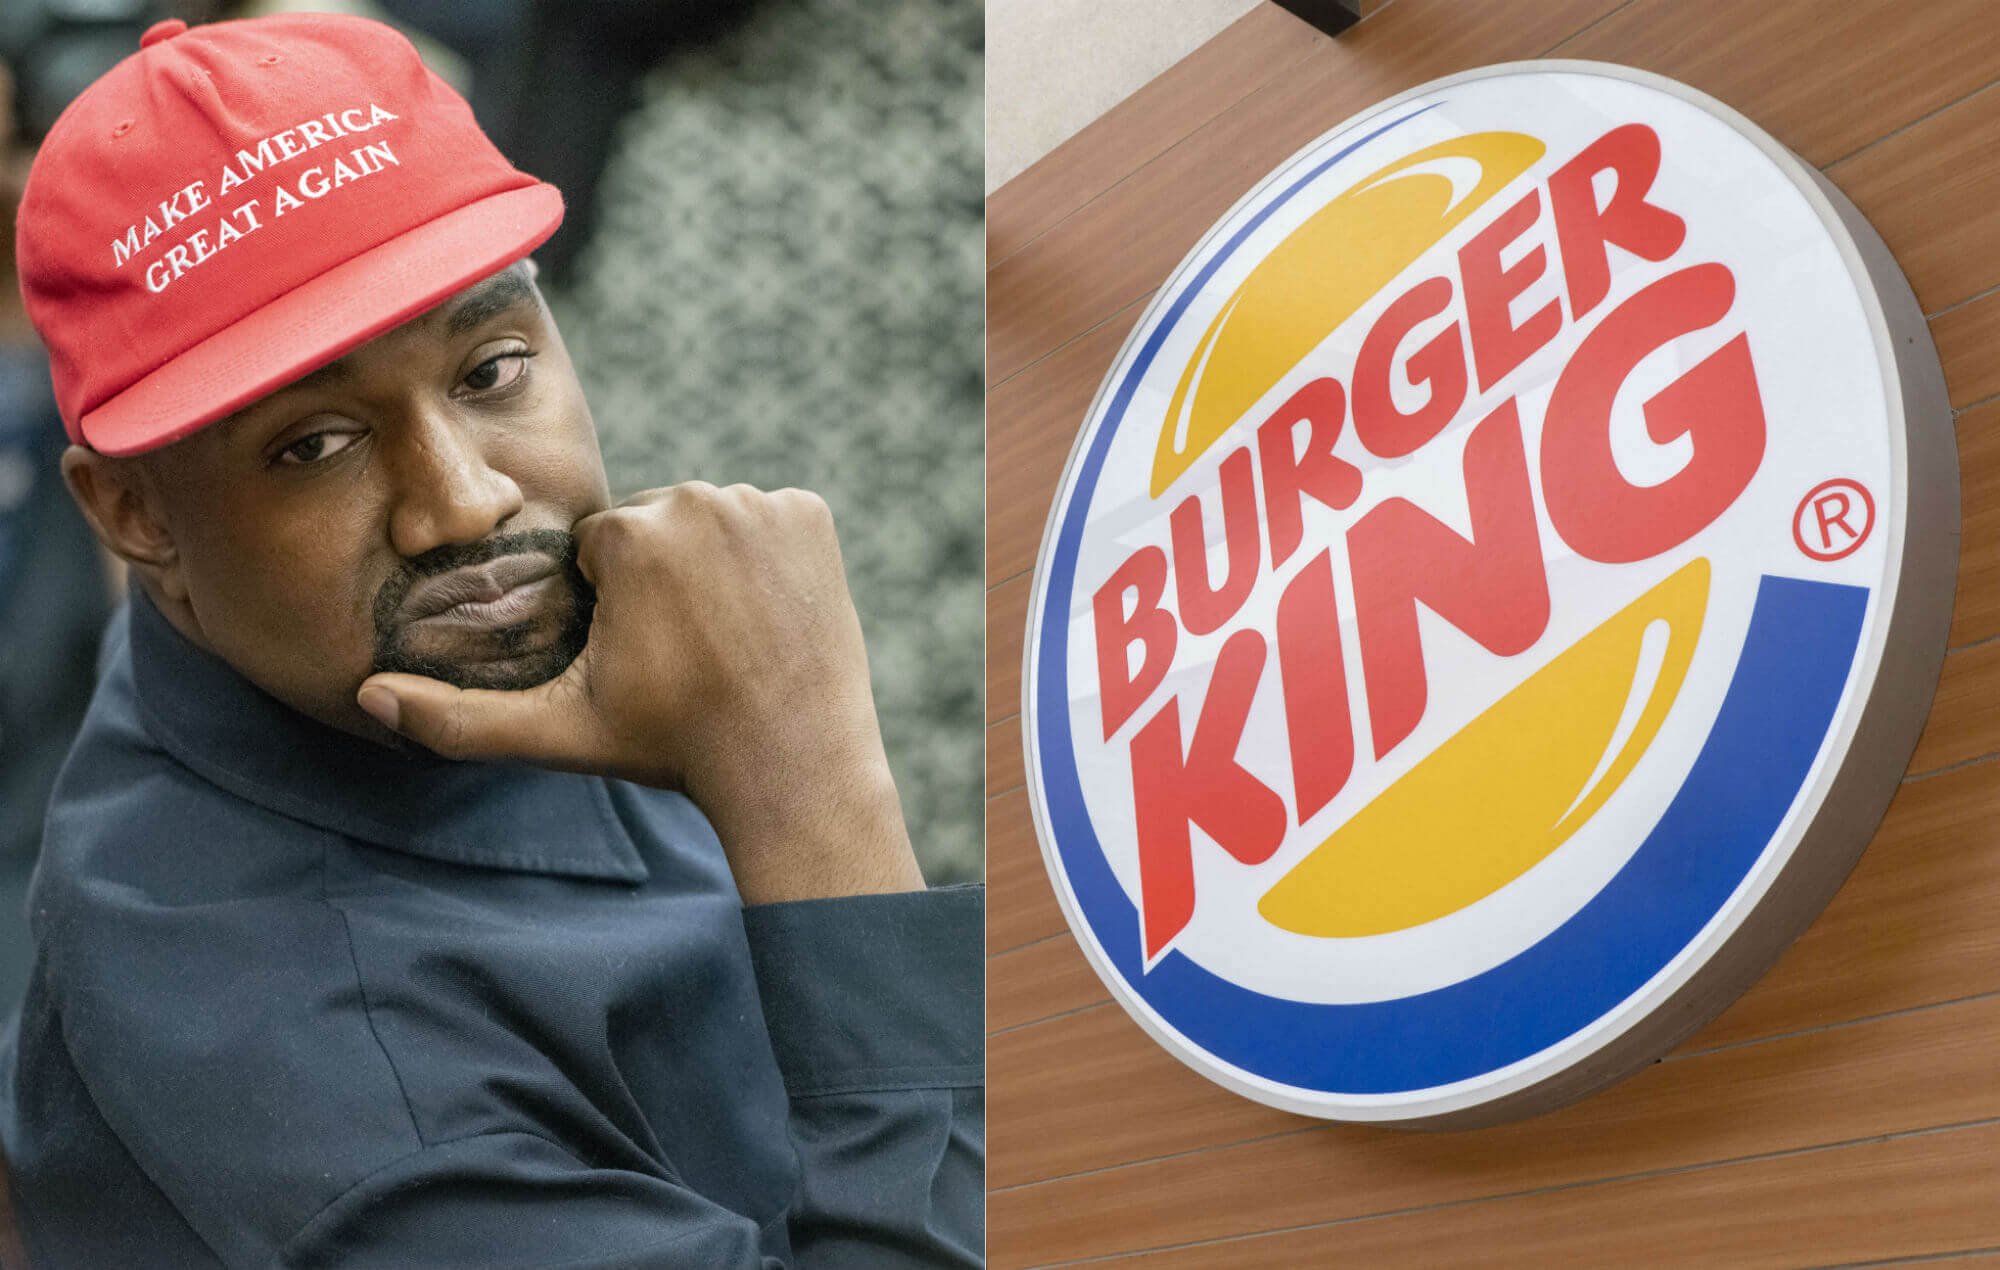 kanye west always his unimpressed self, even with a successful franchise investment